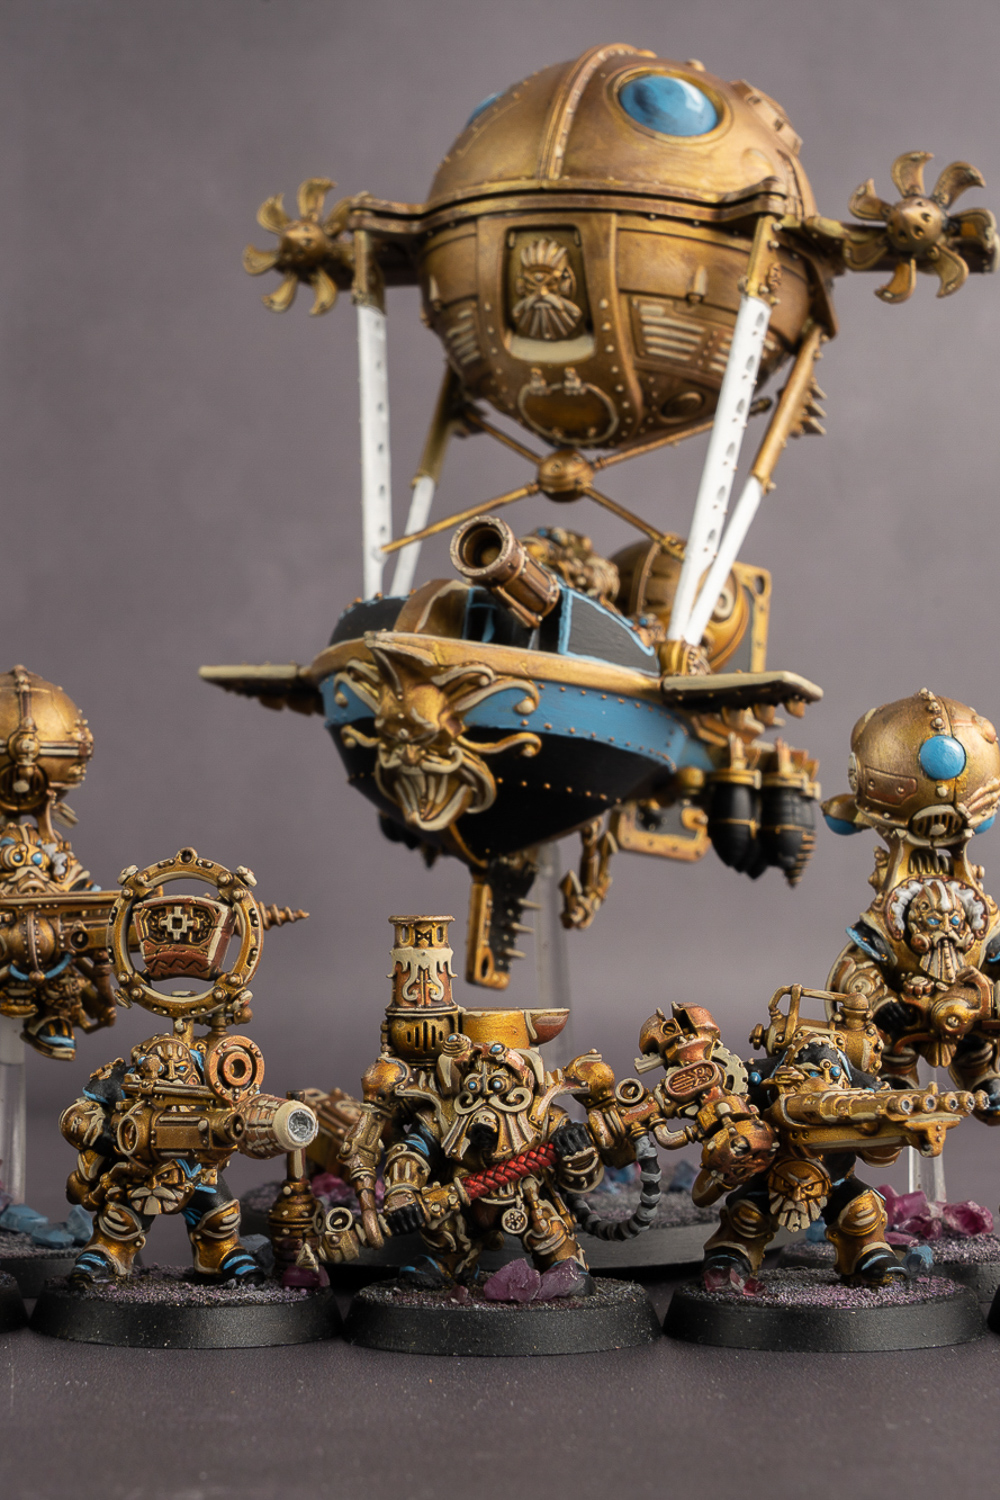 The Kharadron Overlords